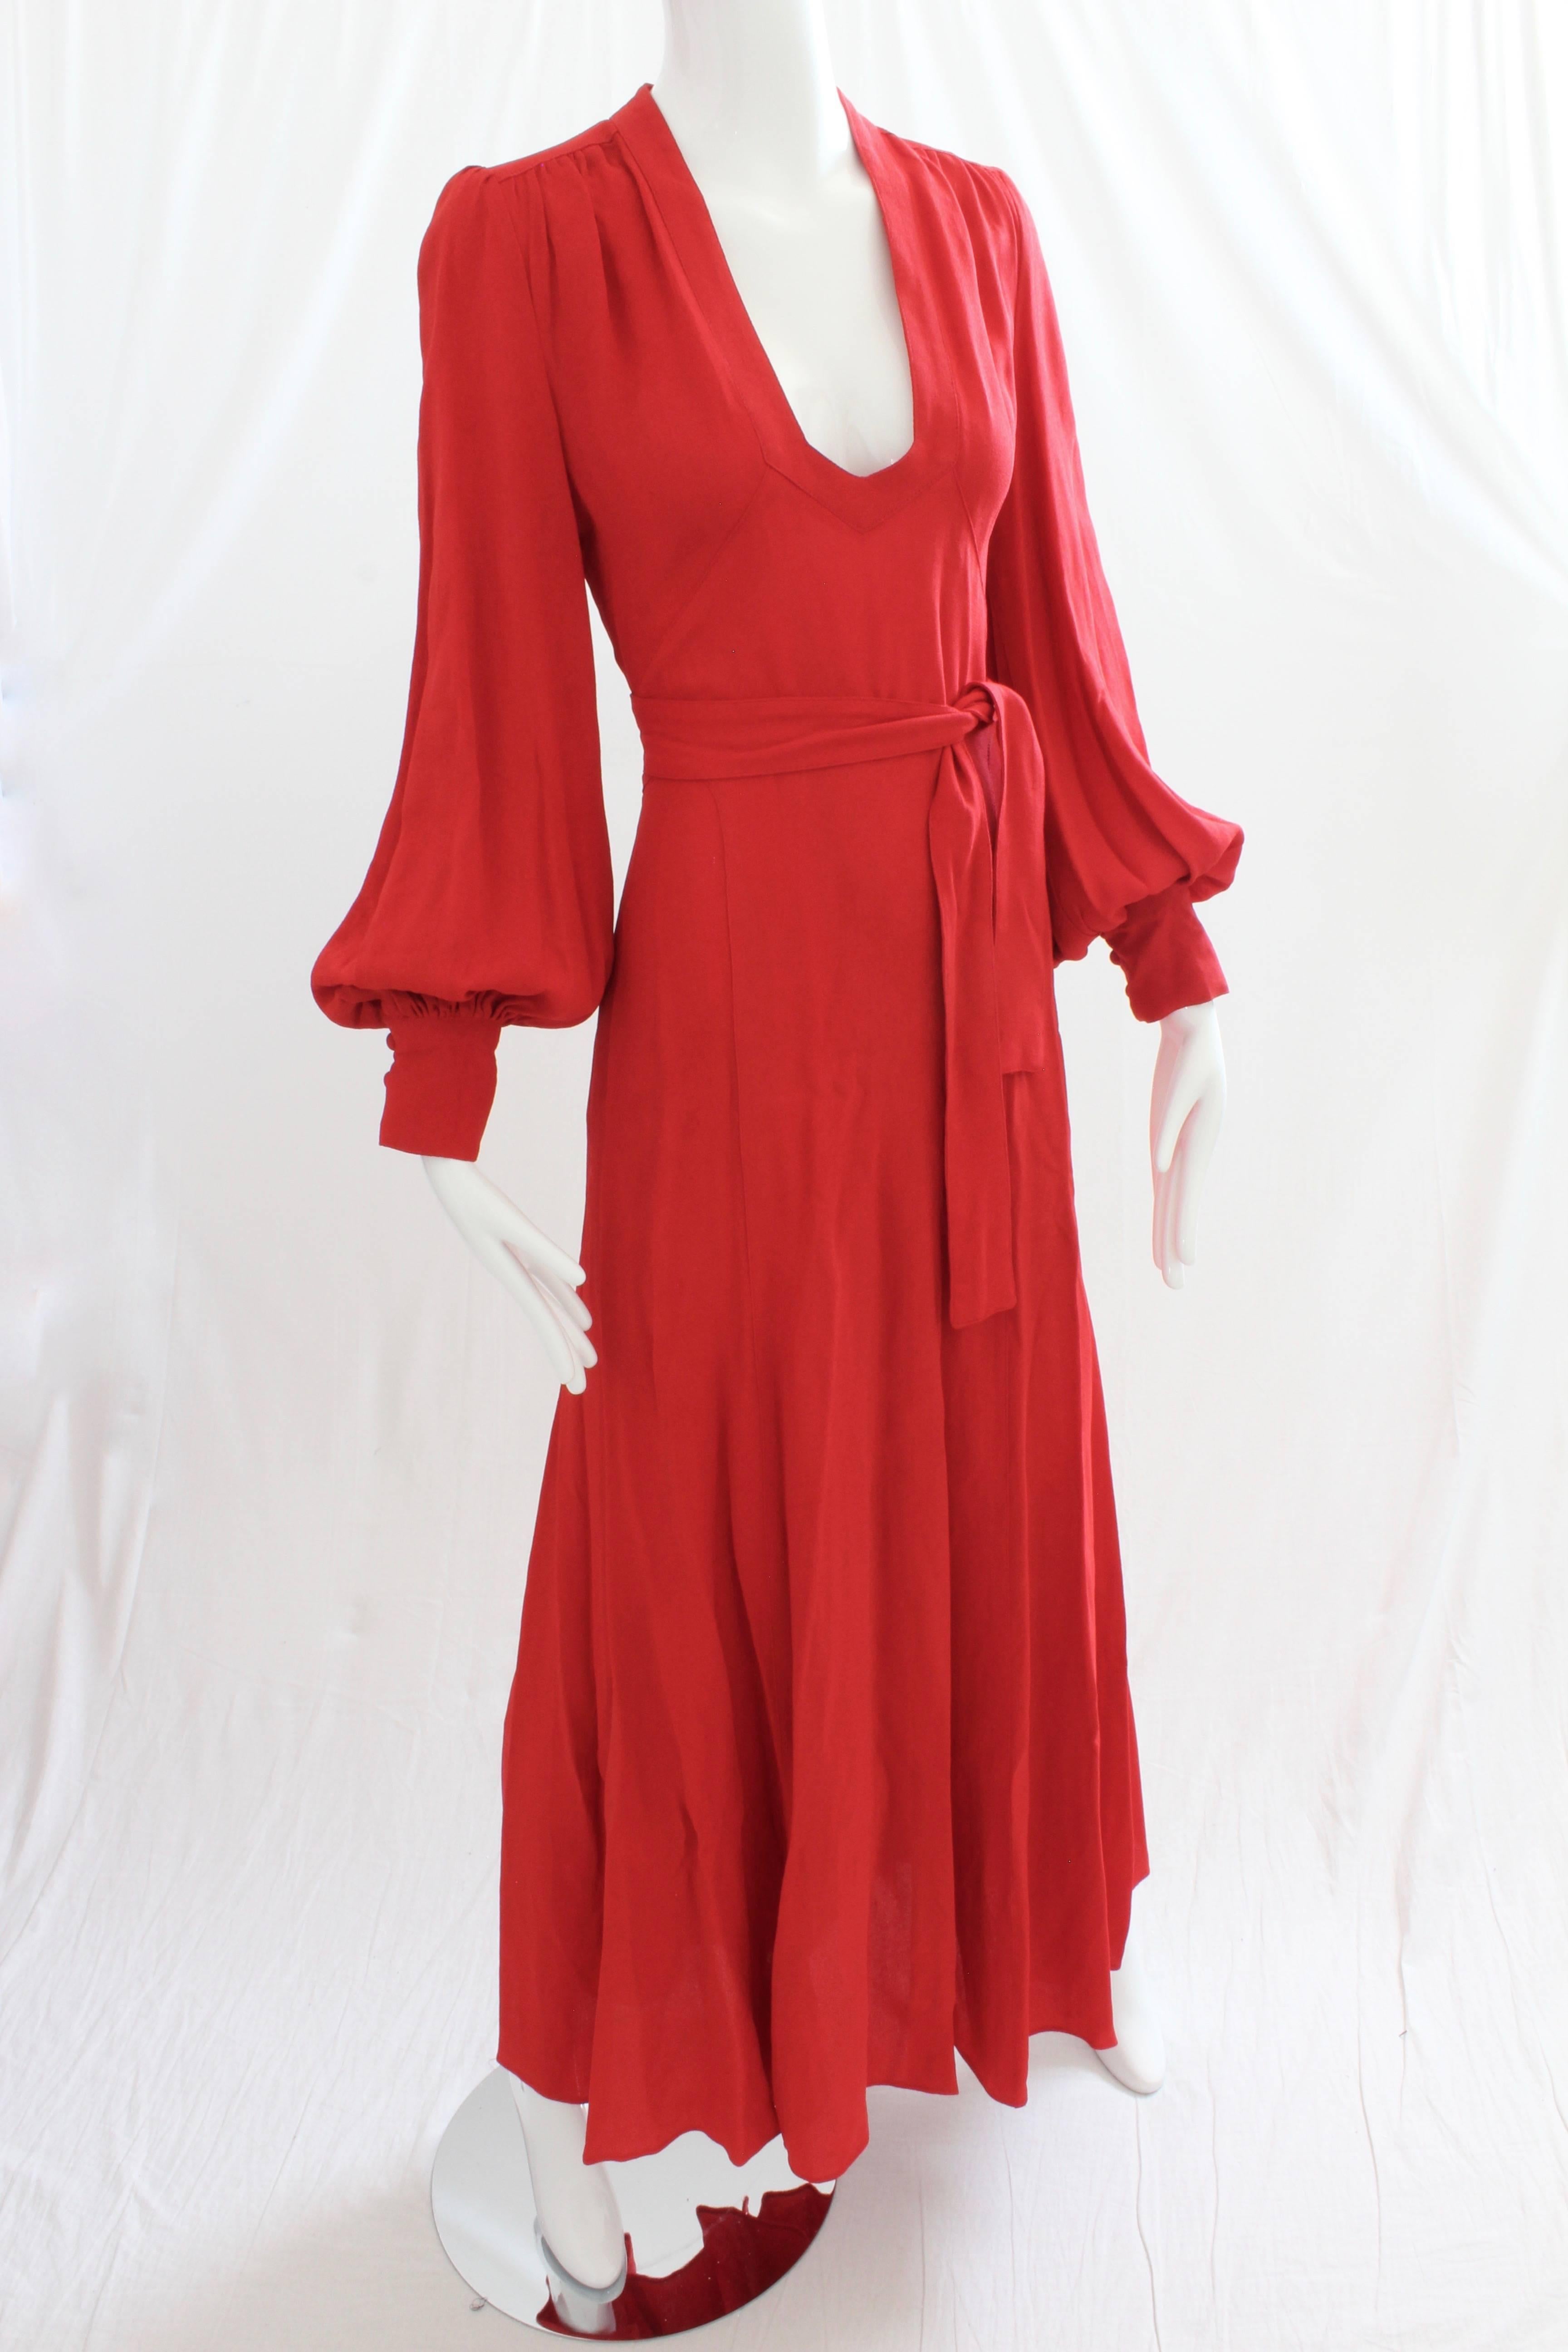 Here's a brilliant red 'Cuddle' dress from Ossie Clark for Radley. Made from Ossie's signature moss crepe fabric, this piece fastens wrap style, and features a plunging neckline, huge bishop sleeves and a sexy open back! So chic! Unlined and meant